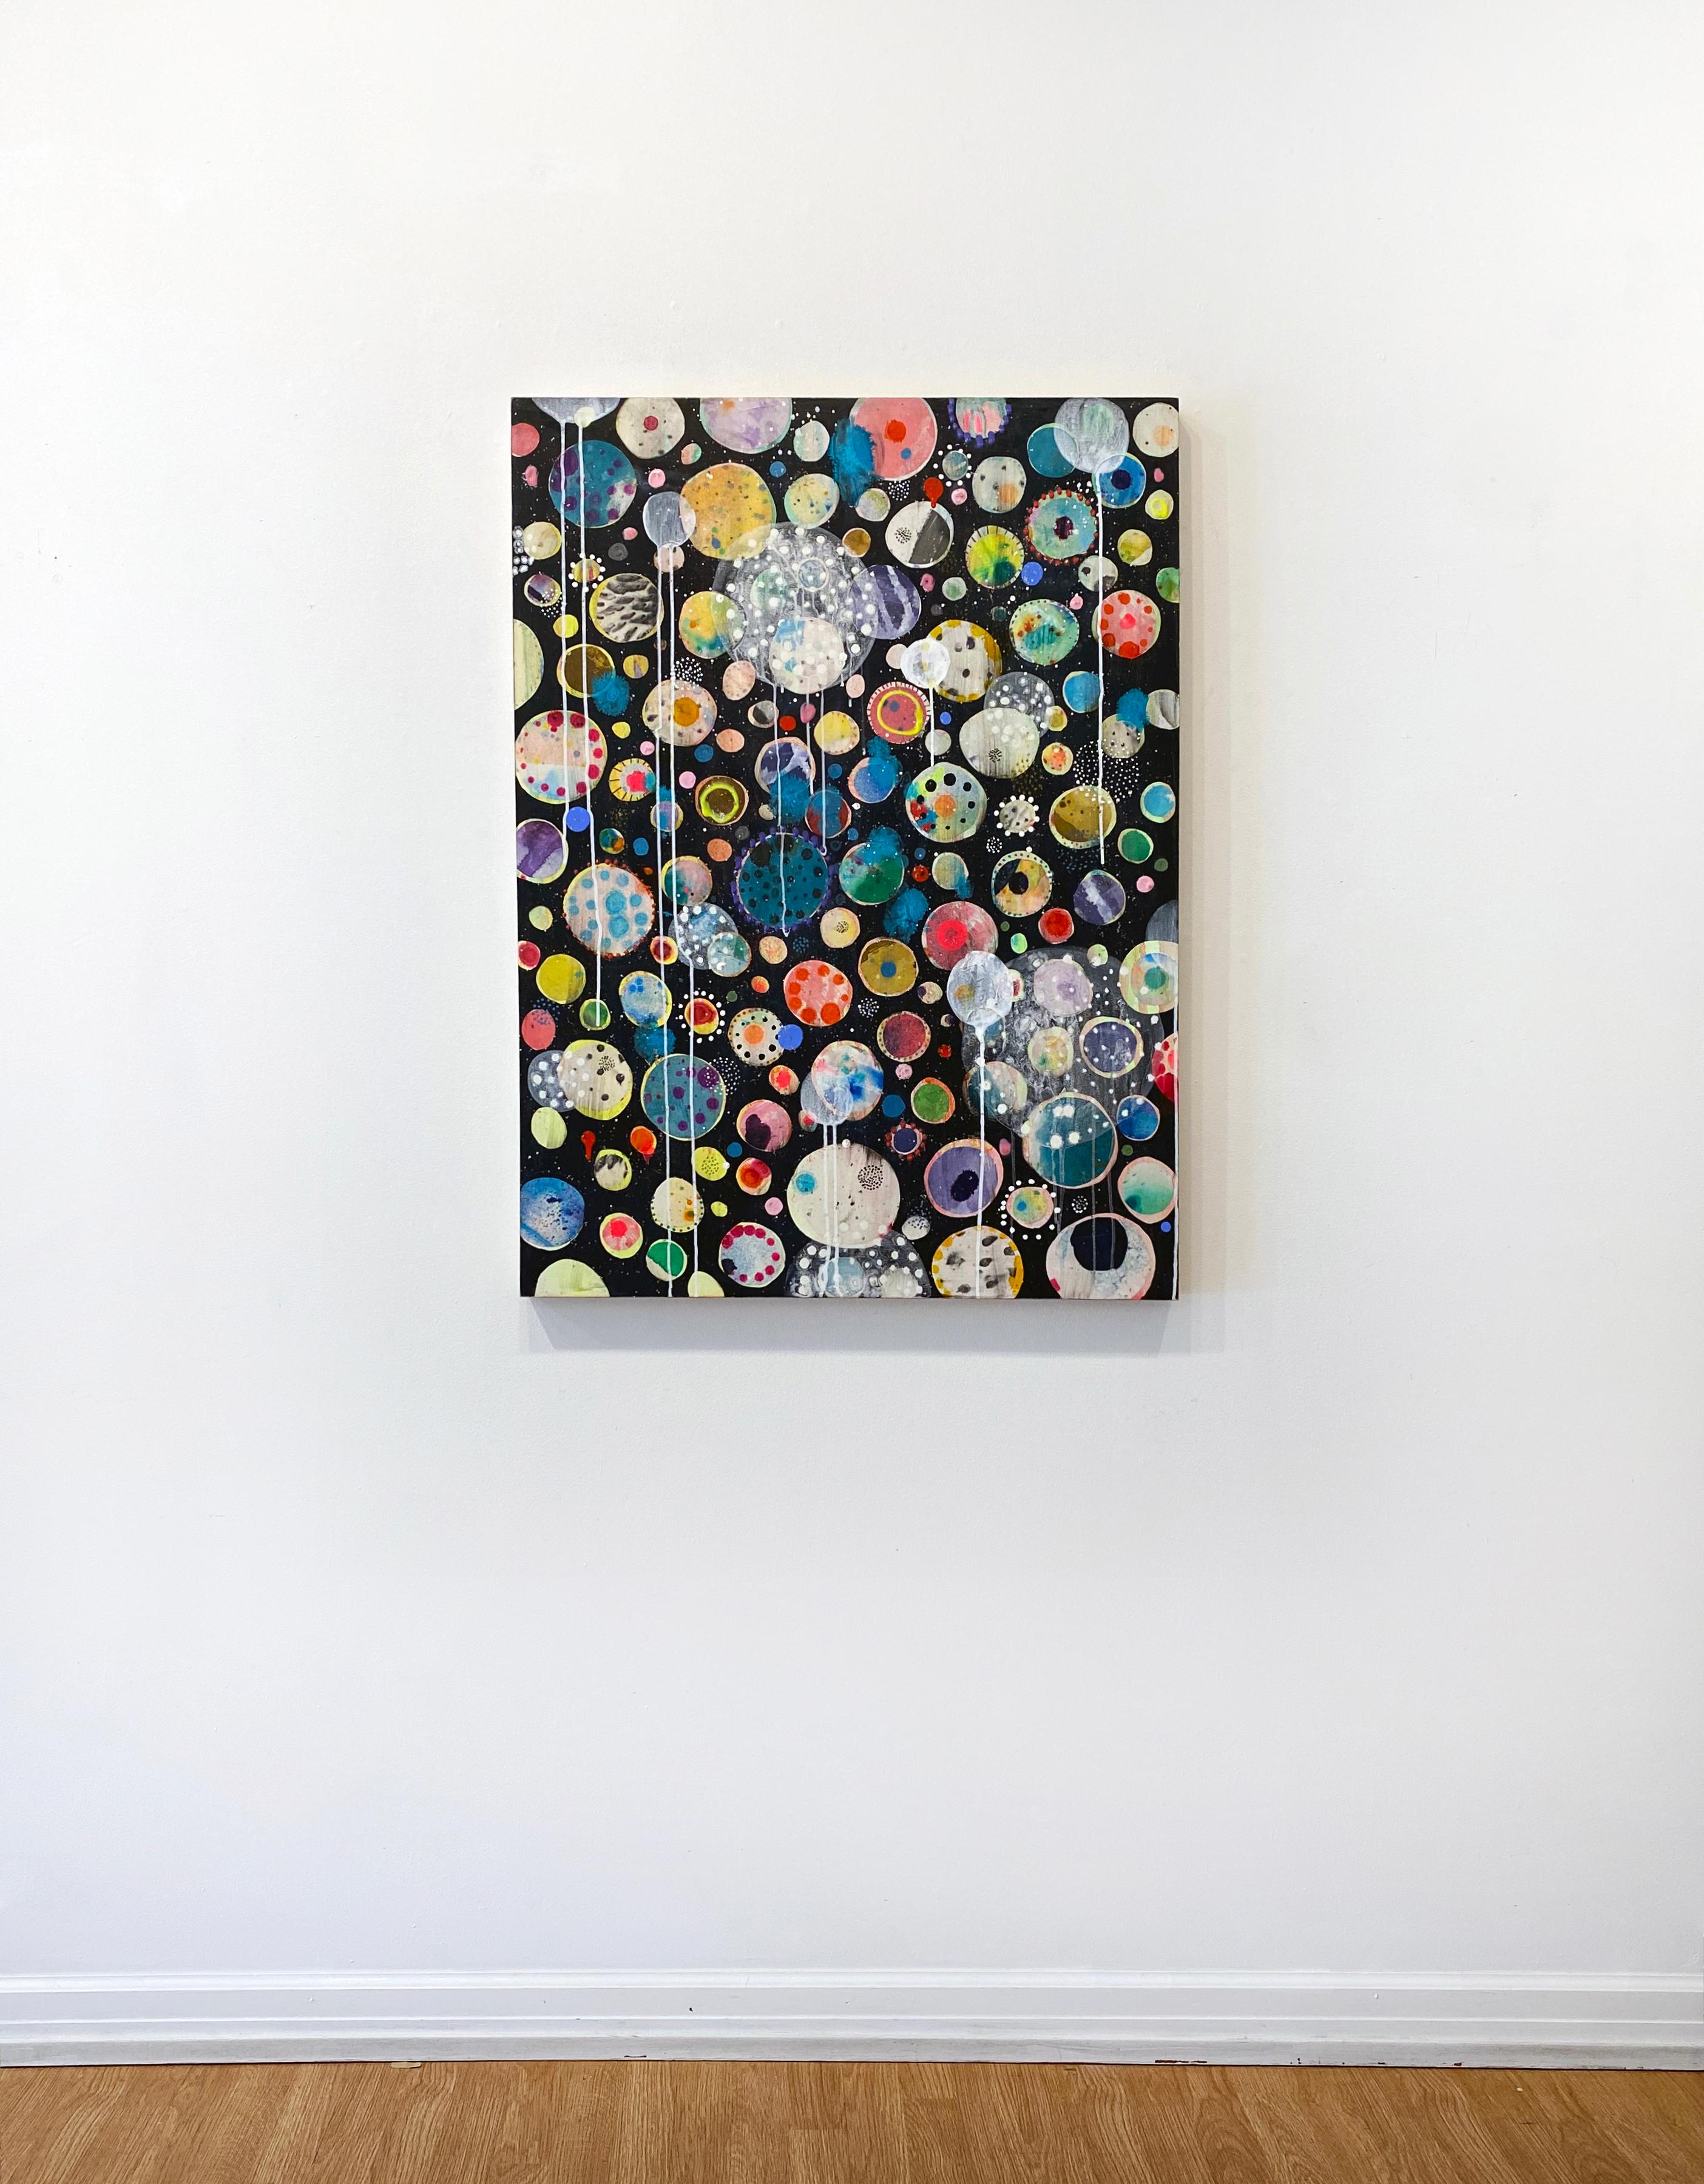 Abstract, Colorful Mixed Media Painting by Liz Tran 'Perseid II' For Sale 3